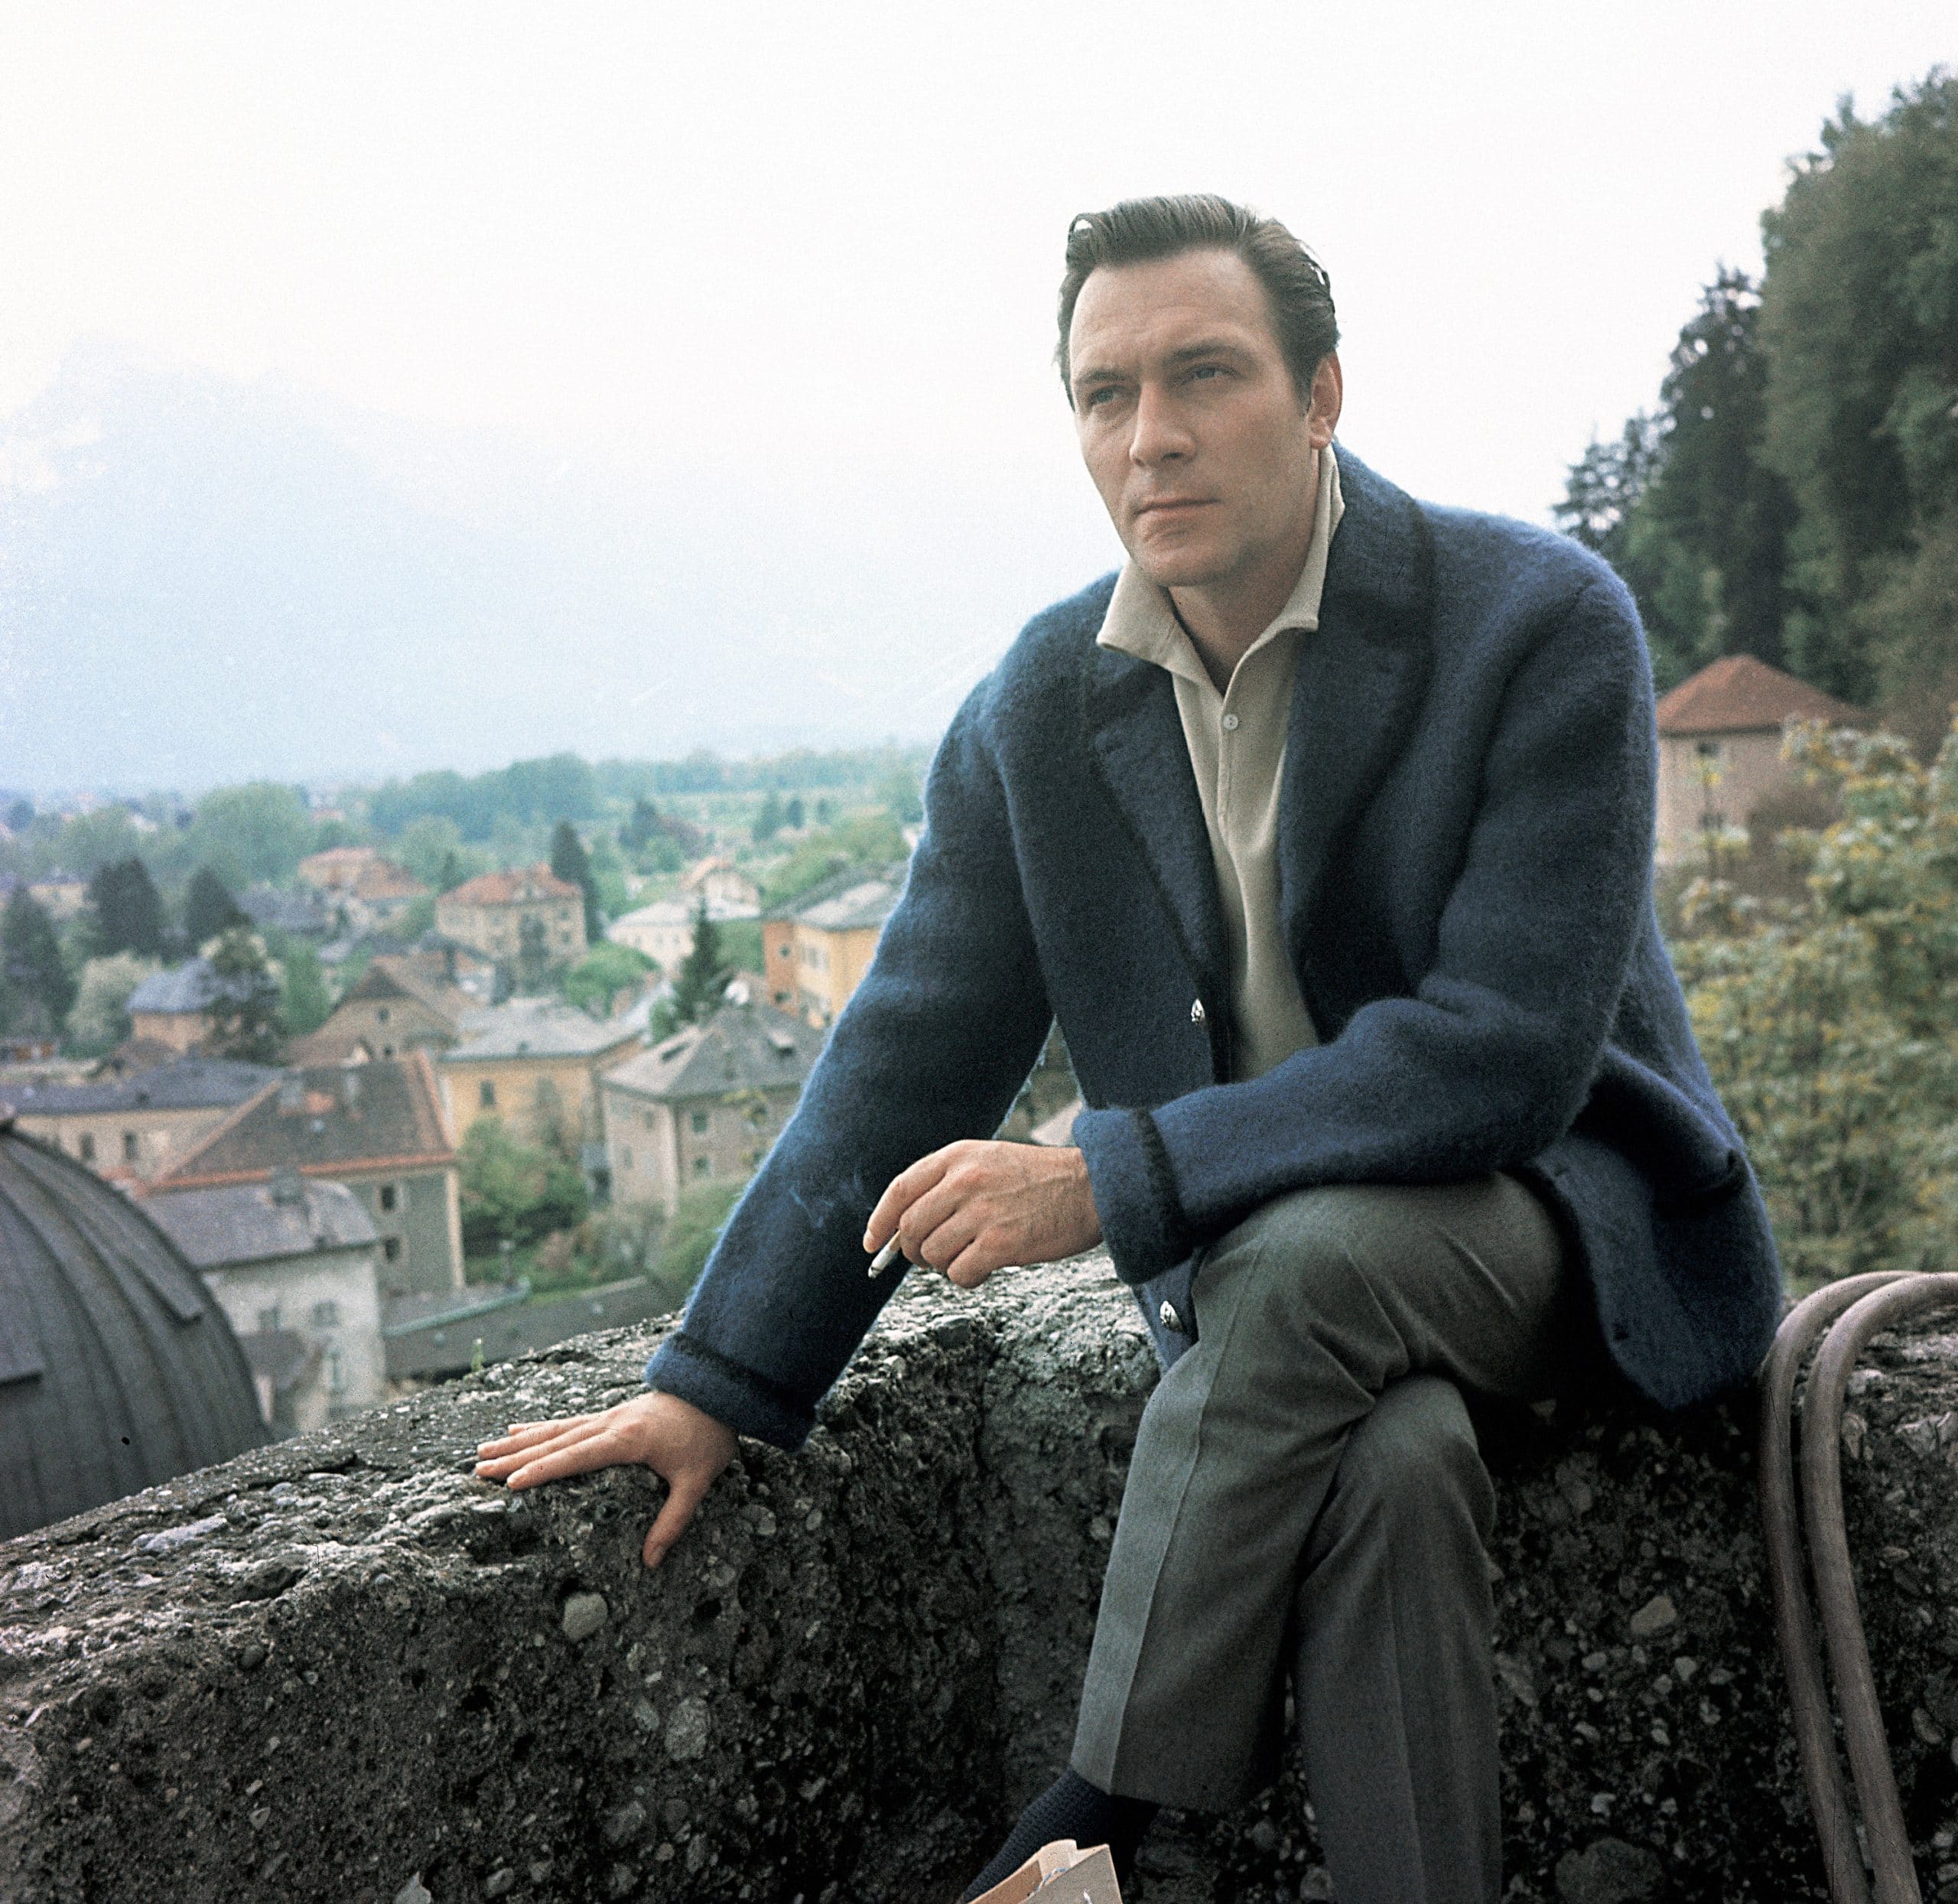 THE SOUND OF MUSIC, Christopher Plummer